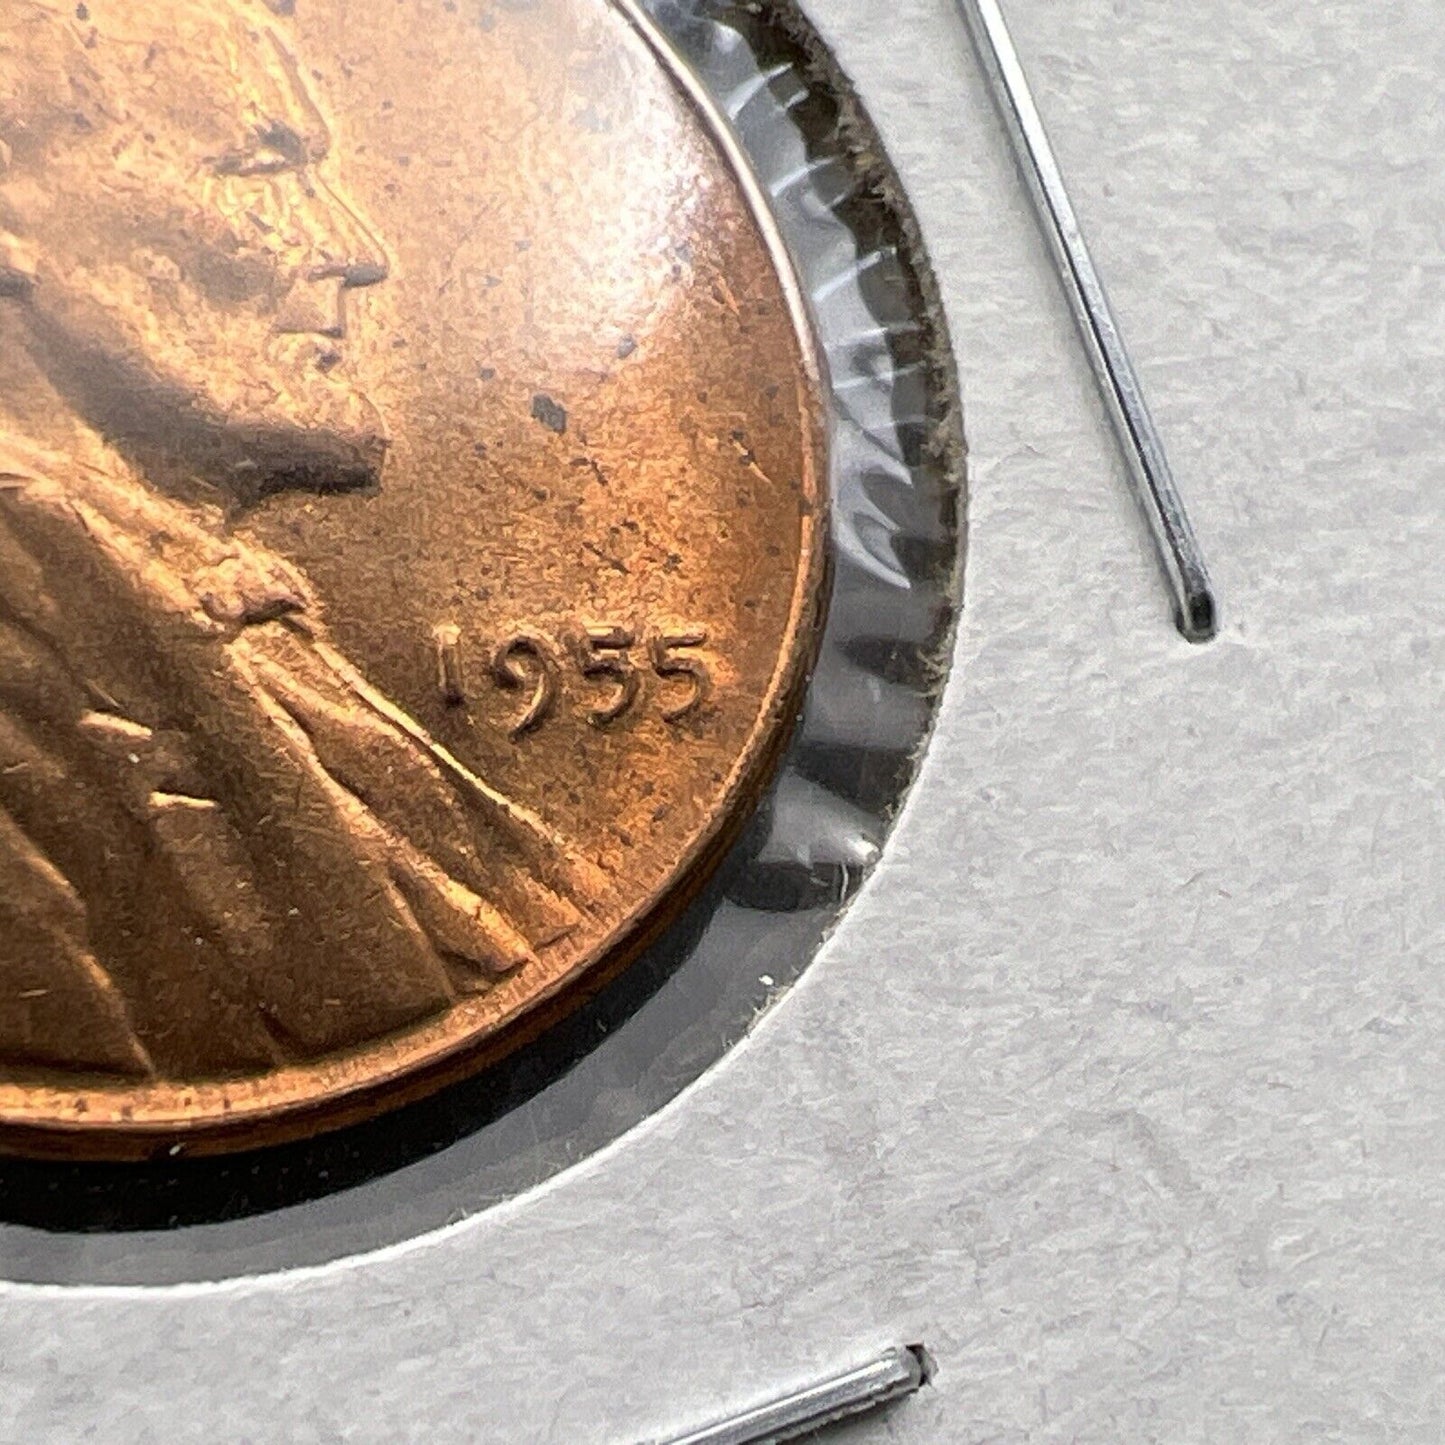 1955 P 1c Lincoln Wheat Cent Penny Coin Poor Man Strike Double Die BU RB #X2024